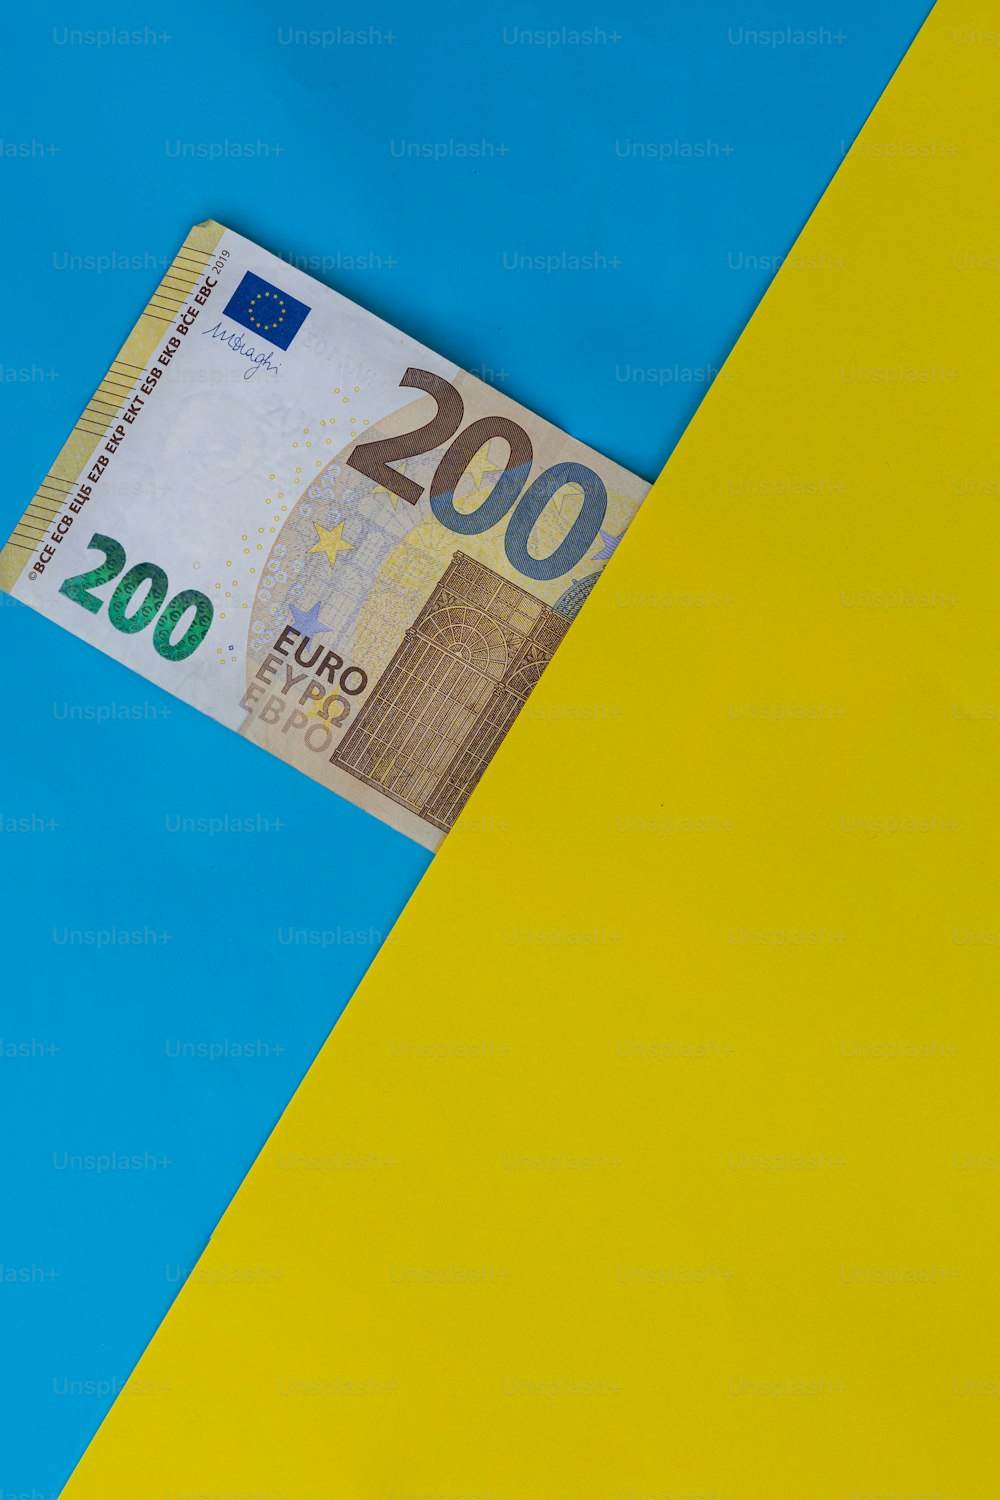 a hundred euros bill sticking out of a yellow and blue background